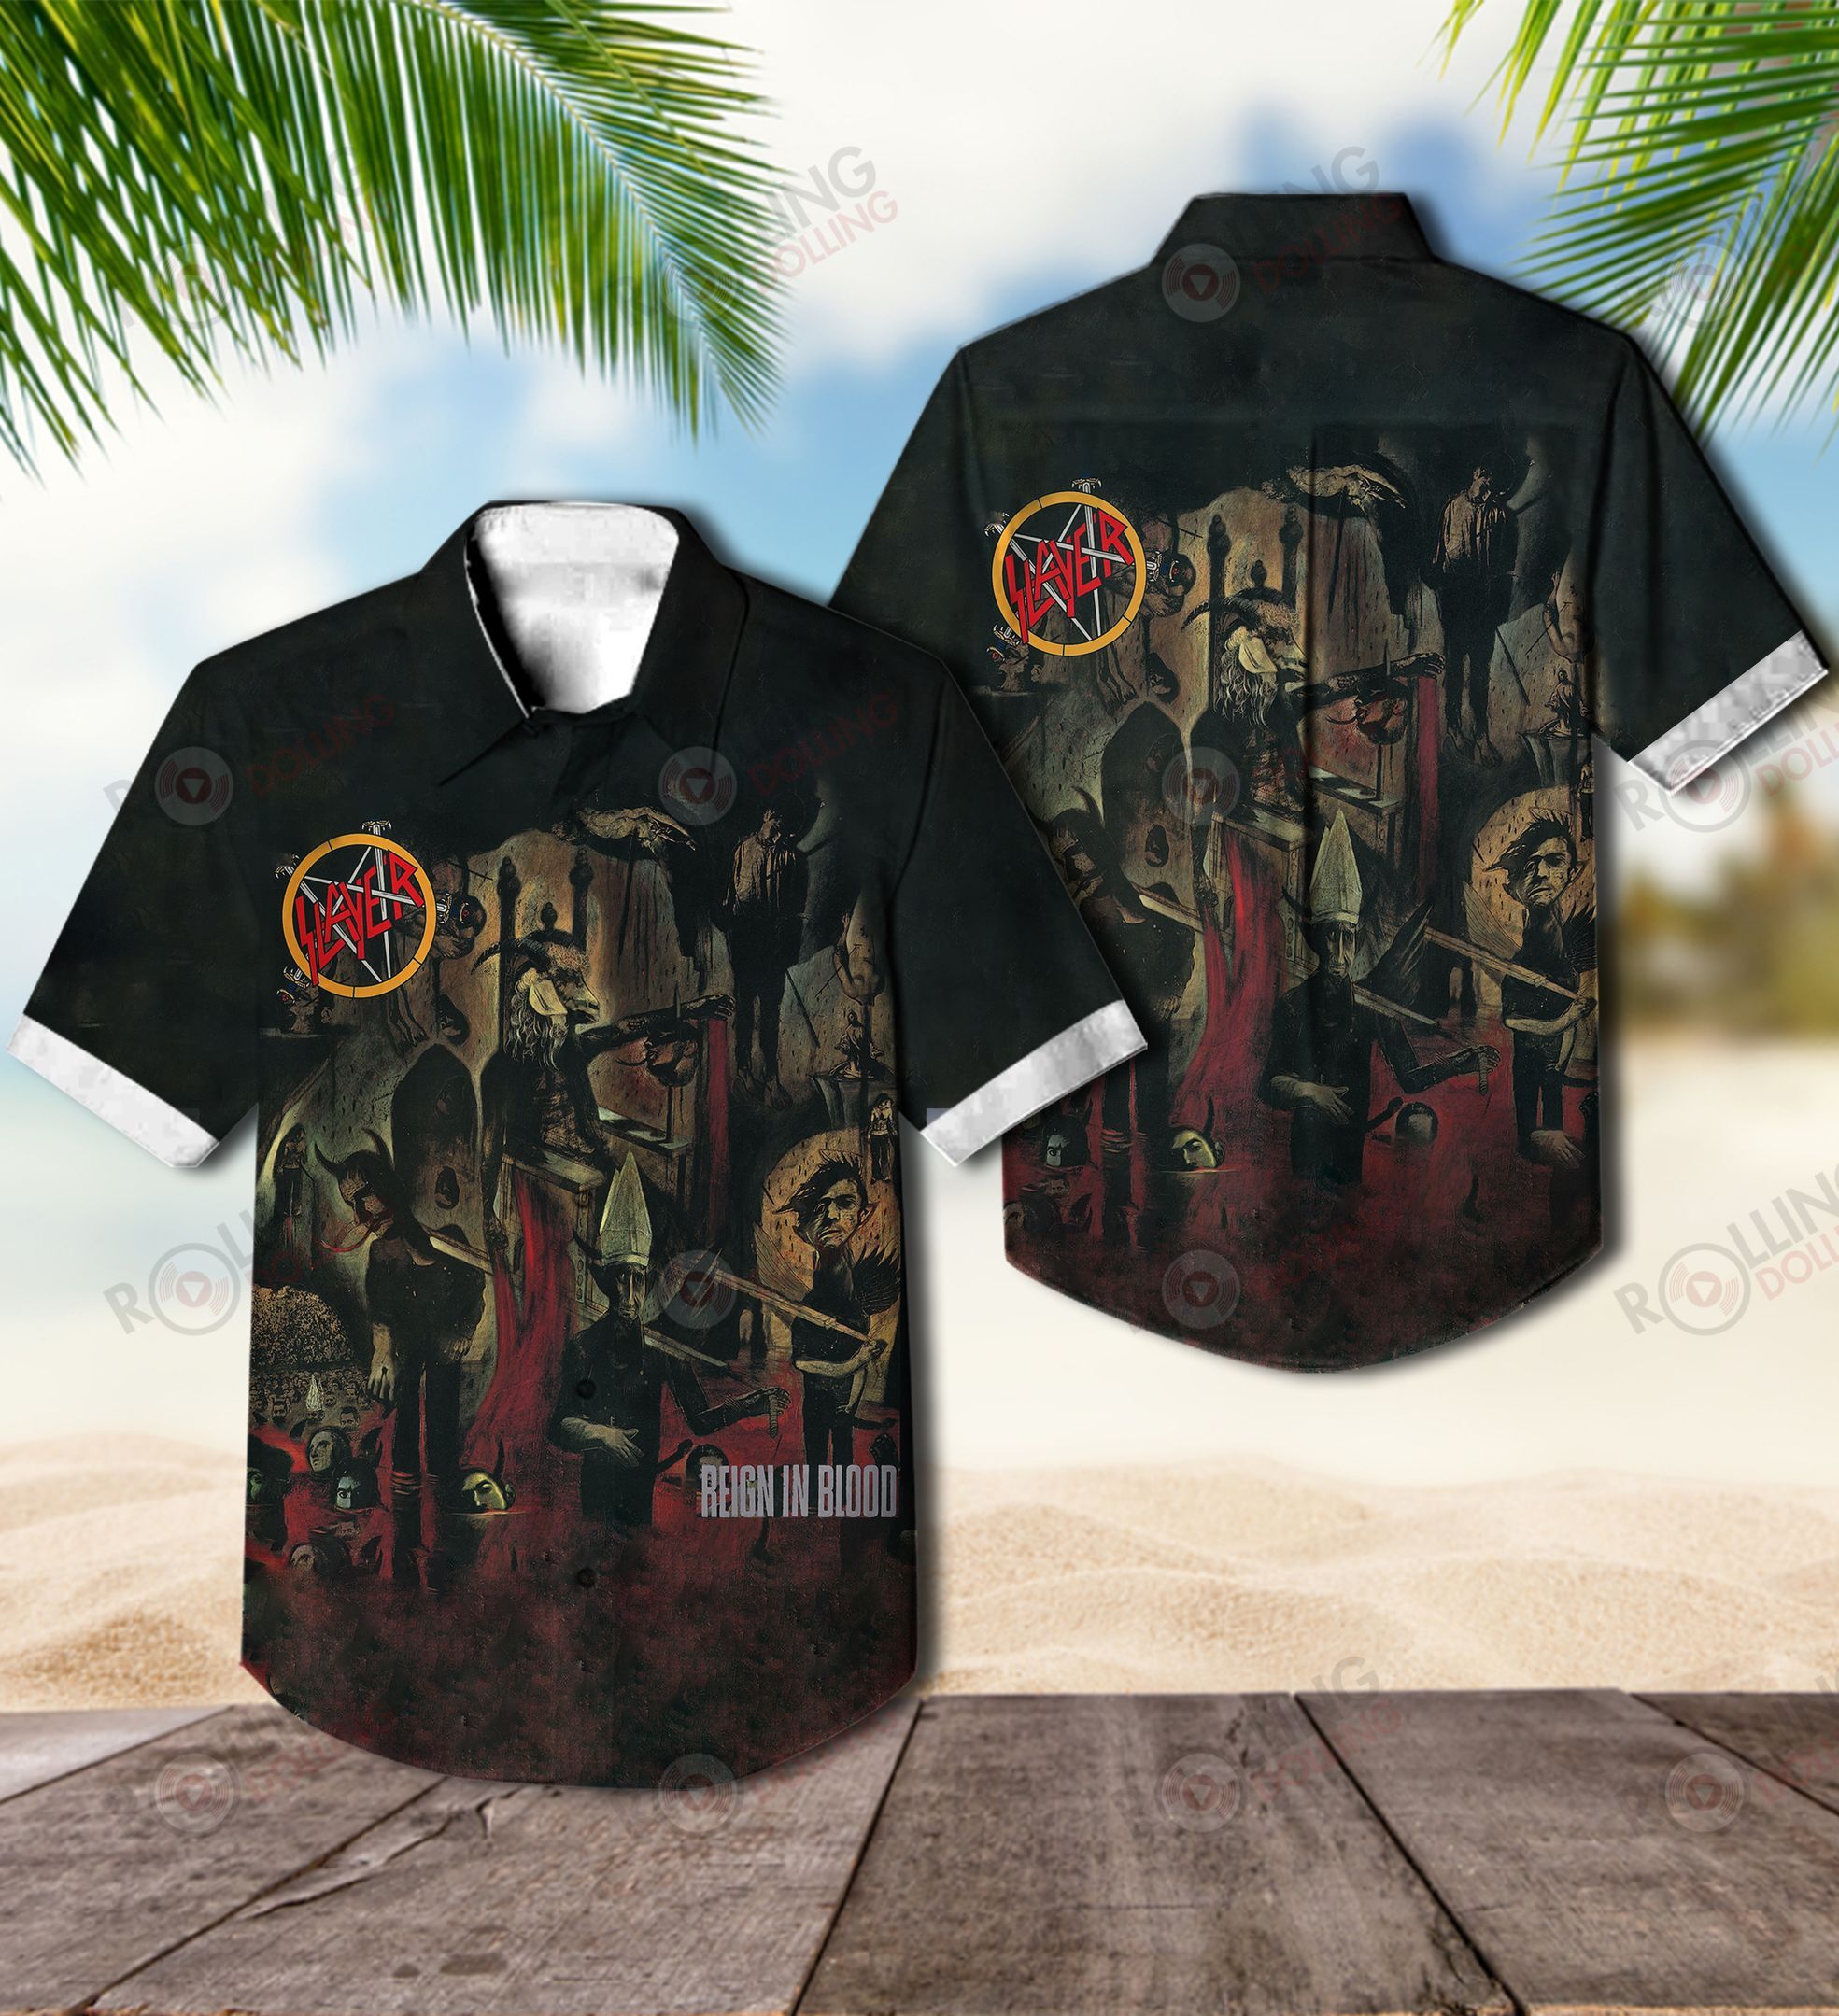 This would make a great gift for any fan who loves Hawaiian Shirt as well as Rock band 13